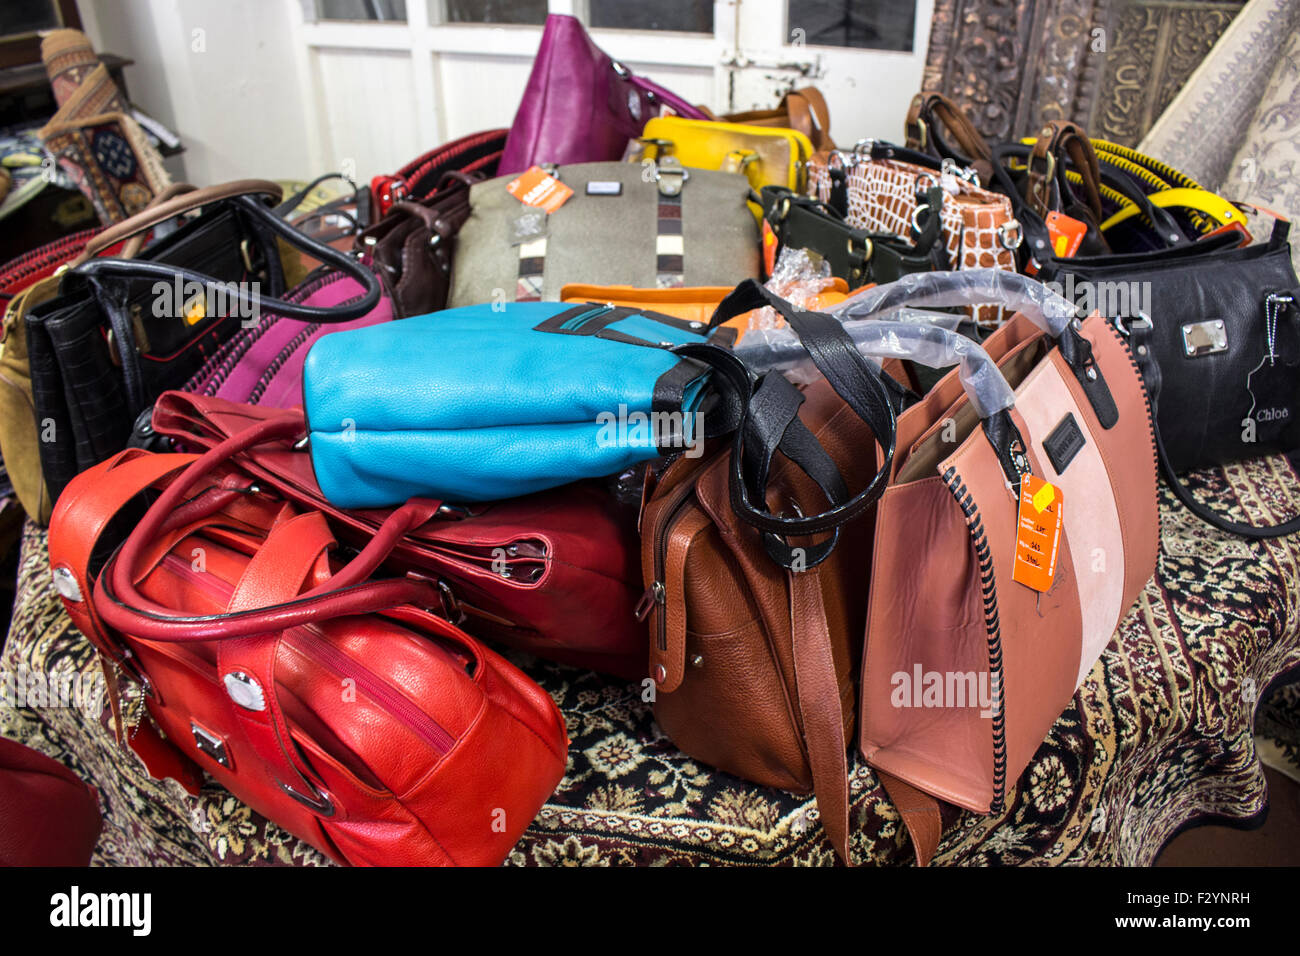 Fake leather handbags for sale in junk shop Stock Photo